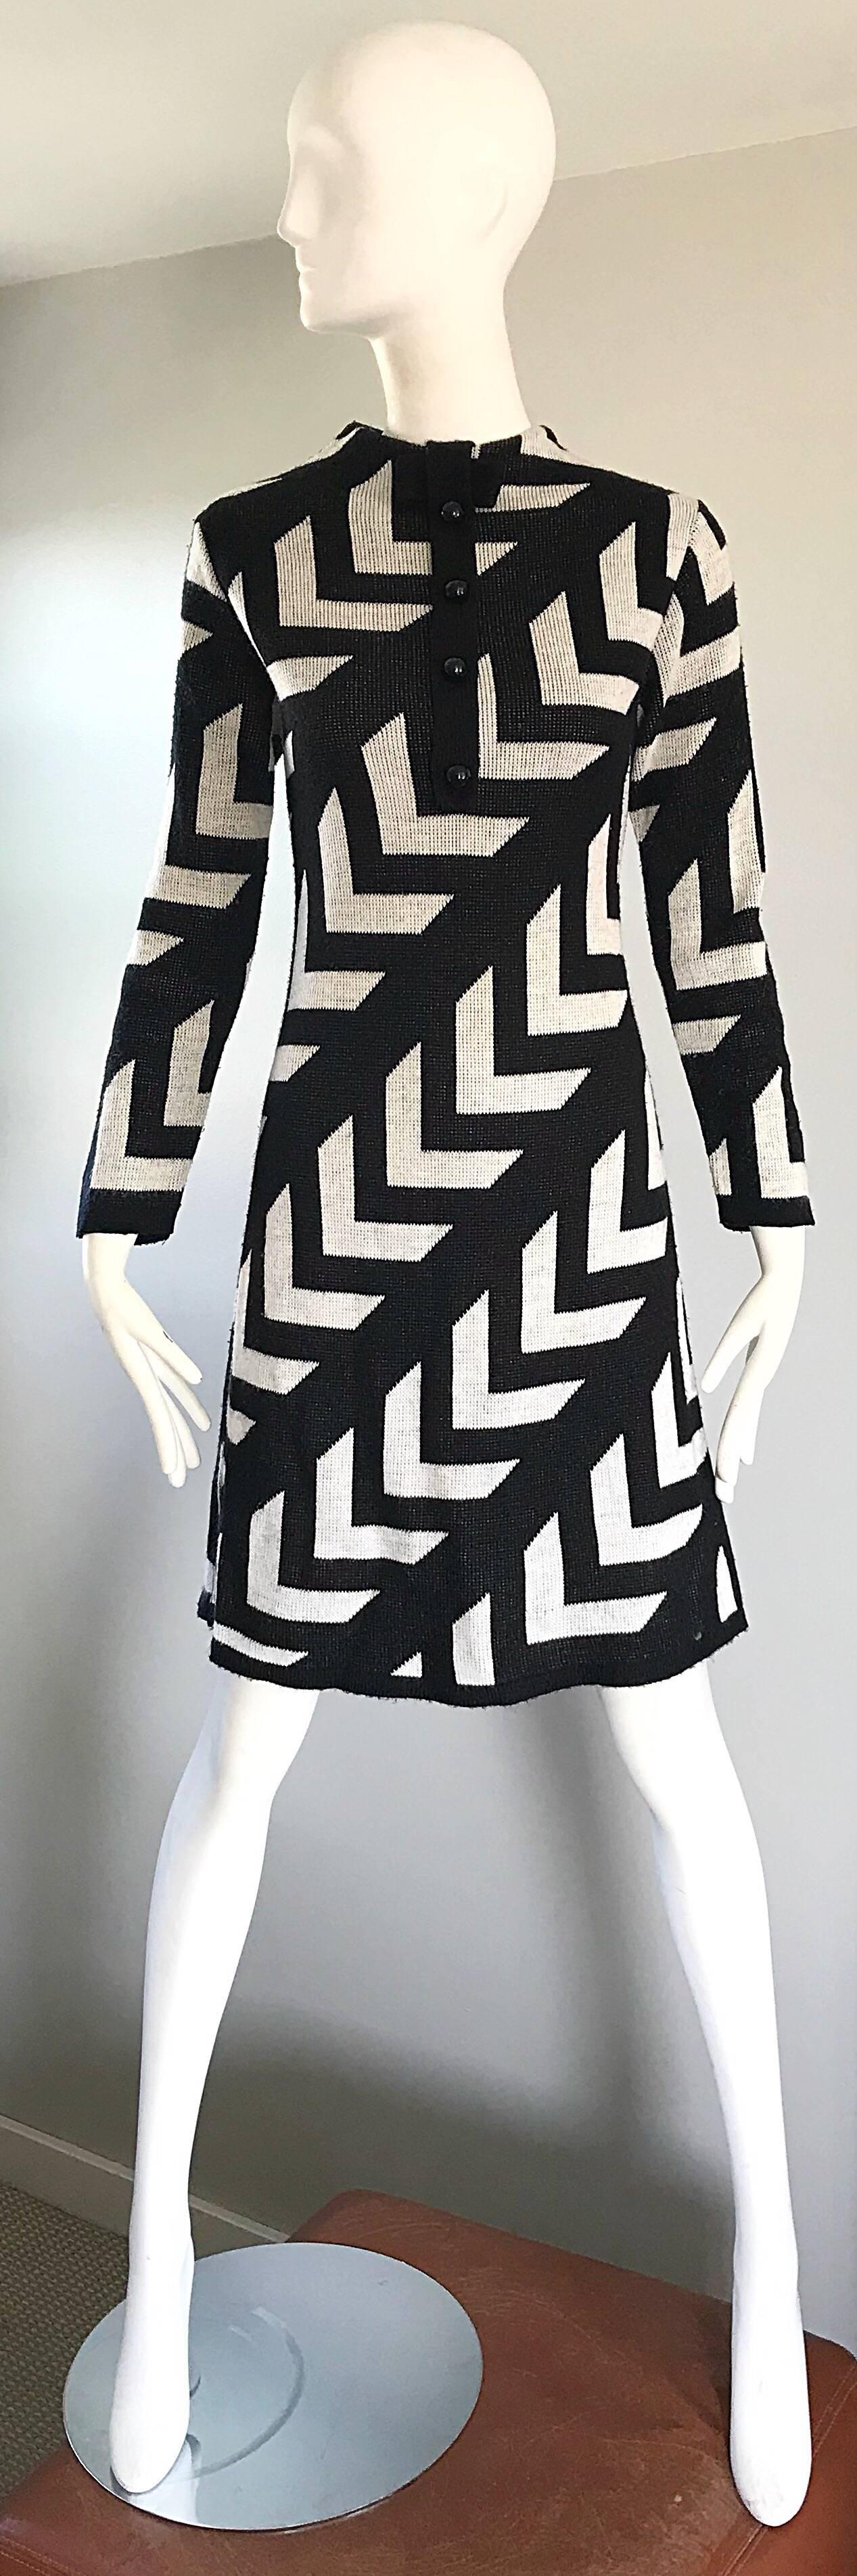 Chic 1960s black and white long sleeve soft wool knit Intarsia print sweater dress! Features a zig zag print, with diagonal black stripes. Fitted bodice, with four black lacquer mock buttons at center front neck, and a slight A-Line skirt. Hidden